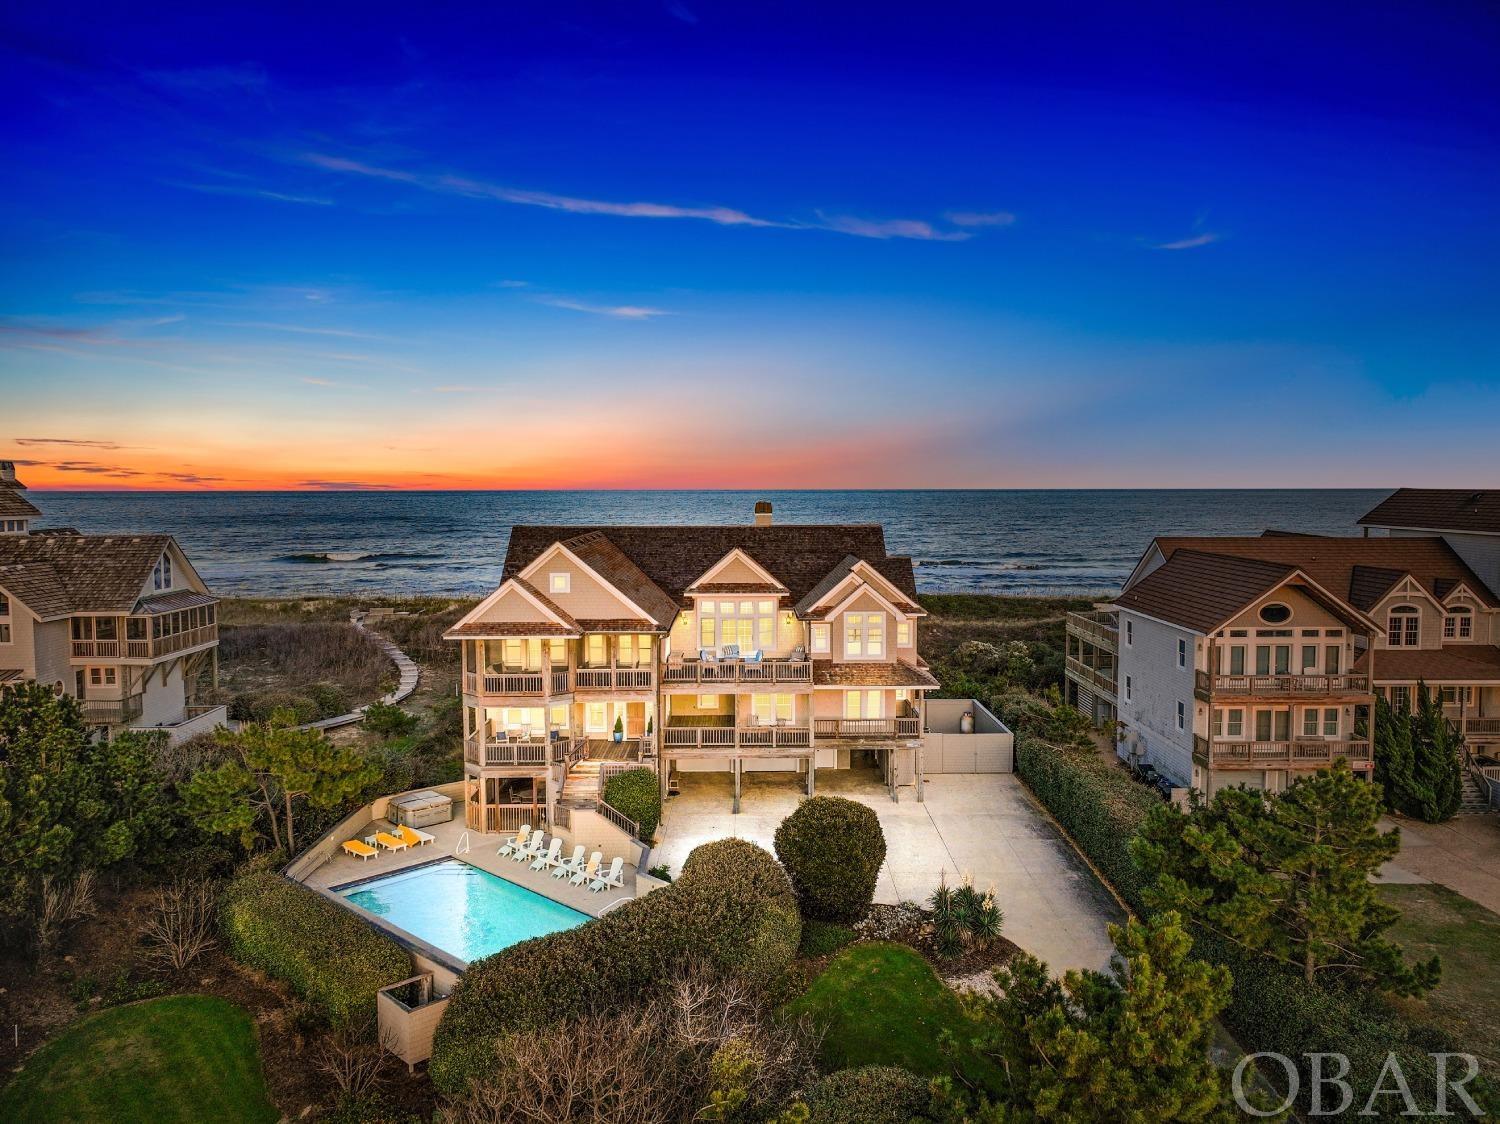 This beautiful Palmer’s Island oceanfront estate, the epitome of luxury, is just one of thirteen homes in a quiet neighborhood that spans one of the Outer Banks' most exclusive and private stretches of shoreline. Situated on a wide, elevated lot, the estate offers breathtaking panoramic views of the ocean and the sound. Each level's extensive decking provides plenty of space for enjoying the sunrise over the ocean and the spectacular Outer Banks sunsets that light up the sky over the sound. Built by one of the top builders in the area, the interior features an open floor plan, intelligently designed to take full advantage of exceptional sight lines, with abundant natural light made available through the many oversized windows. Common areas boast elaborate décor and top-quality furnishings, surrounded by exquisite shiplap walls and high ceilings, along with custom flooring. Other amenities include a central vacuum, security system, and even an enclosed area for storing/parking a boat. The grand foyer, dining room, gourmet kitchen, and main family room are impressive. Spacious and well-equipped, the kitchen offers not one, but two large islands, both with sinks, and high-end stainless appliances that feature two ovens, two dishwashers, a gourmet gas top stove, an ice machine, wine and beverage coolers, in addition to a large sub-zero refrigerator, and bar-top seating that flows seamlessly into a breakfast nook on one side and the dining and living areas on the other, making entertaining large groups a breeze. A beautiful screened porch off the dining area is the perfect spot to gaze upon the sound while taking in the amazing Outer Banks sunsets. An en-suite primary bedroom offers access to the sun deck and breathtaking views of the ocean, rounding out the top-floor living area. The en-suite bathroom features a steam shower and a distinctive whirlpool tub where you can unwind while soaking in yet another spectacular view of the sound. Most bedrooms are situated on the mid-level, accessible by elevator or stairs, each spacious and offering impressive water views and access to the home’s extensive decking. Three of the mid-floor bedrooms have en-suite bathrooms, and the other two have private half-bathrooms and share a shower and tub. Yet another room on this level currently has two twin beds but could instead provide a great office or gym. The mid-level also includes a large den with a wet bar, complete with a beverage refrigerator and ice maker, as well as a TV and a large couch for lounging and watching movies or a big game. Like the bedrooms, the den also has access to the covered deck, where you can take in the salt air, listen to the waves on the beach, and relax in a shaded hammock or swing. The last bedroom is found on the first level. Spacious, quiet, and comfortable, there is a full bathroom attached. An oversized two car garage and four exterior storage sheds offer an abundance of options for storing all of your beach gear and toys, and a sizable stamped concrete driveway offers plenty of room for parking. Also on the ground level is an expansive patio area, offering a grill and outside table adjacent to an oversized custom pool and six-person hot tub. Also adjacent to the patio is a breezeway that has two outdoor showers and that flows into a private boardwalk guiding you to the beach. Palmer's Island is a premier neighborhood in the northernmost part of Duck that offers unpopulated beaches, awe-inspiring views of the ocean and sound, private access to a sound side pier that is ideal for launching your kayak or paddleboard, and the option to pay for access to the Sanderling Community's tennis courts, clubhouse and gym. Don't miss the opportunity to join this private and quiet community, located in one of the most exclusive and desirable neighborhoods on the OBX. Please be sure to check out the virtual tour of this property by copy/paste into your browser: https://my.matterport.com/show/?m=vgJjSHSBJUk&mls=1